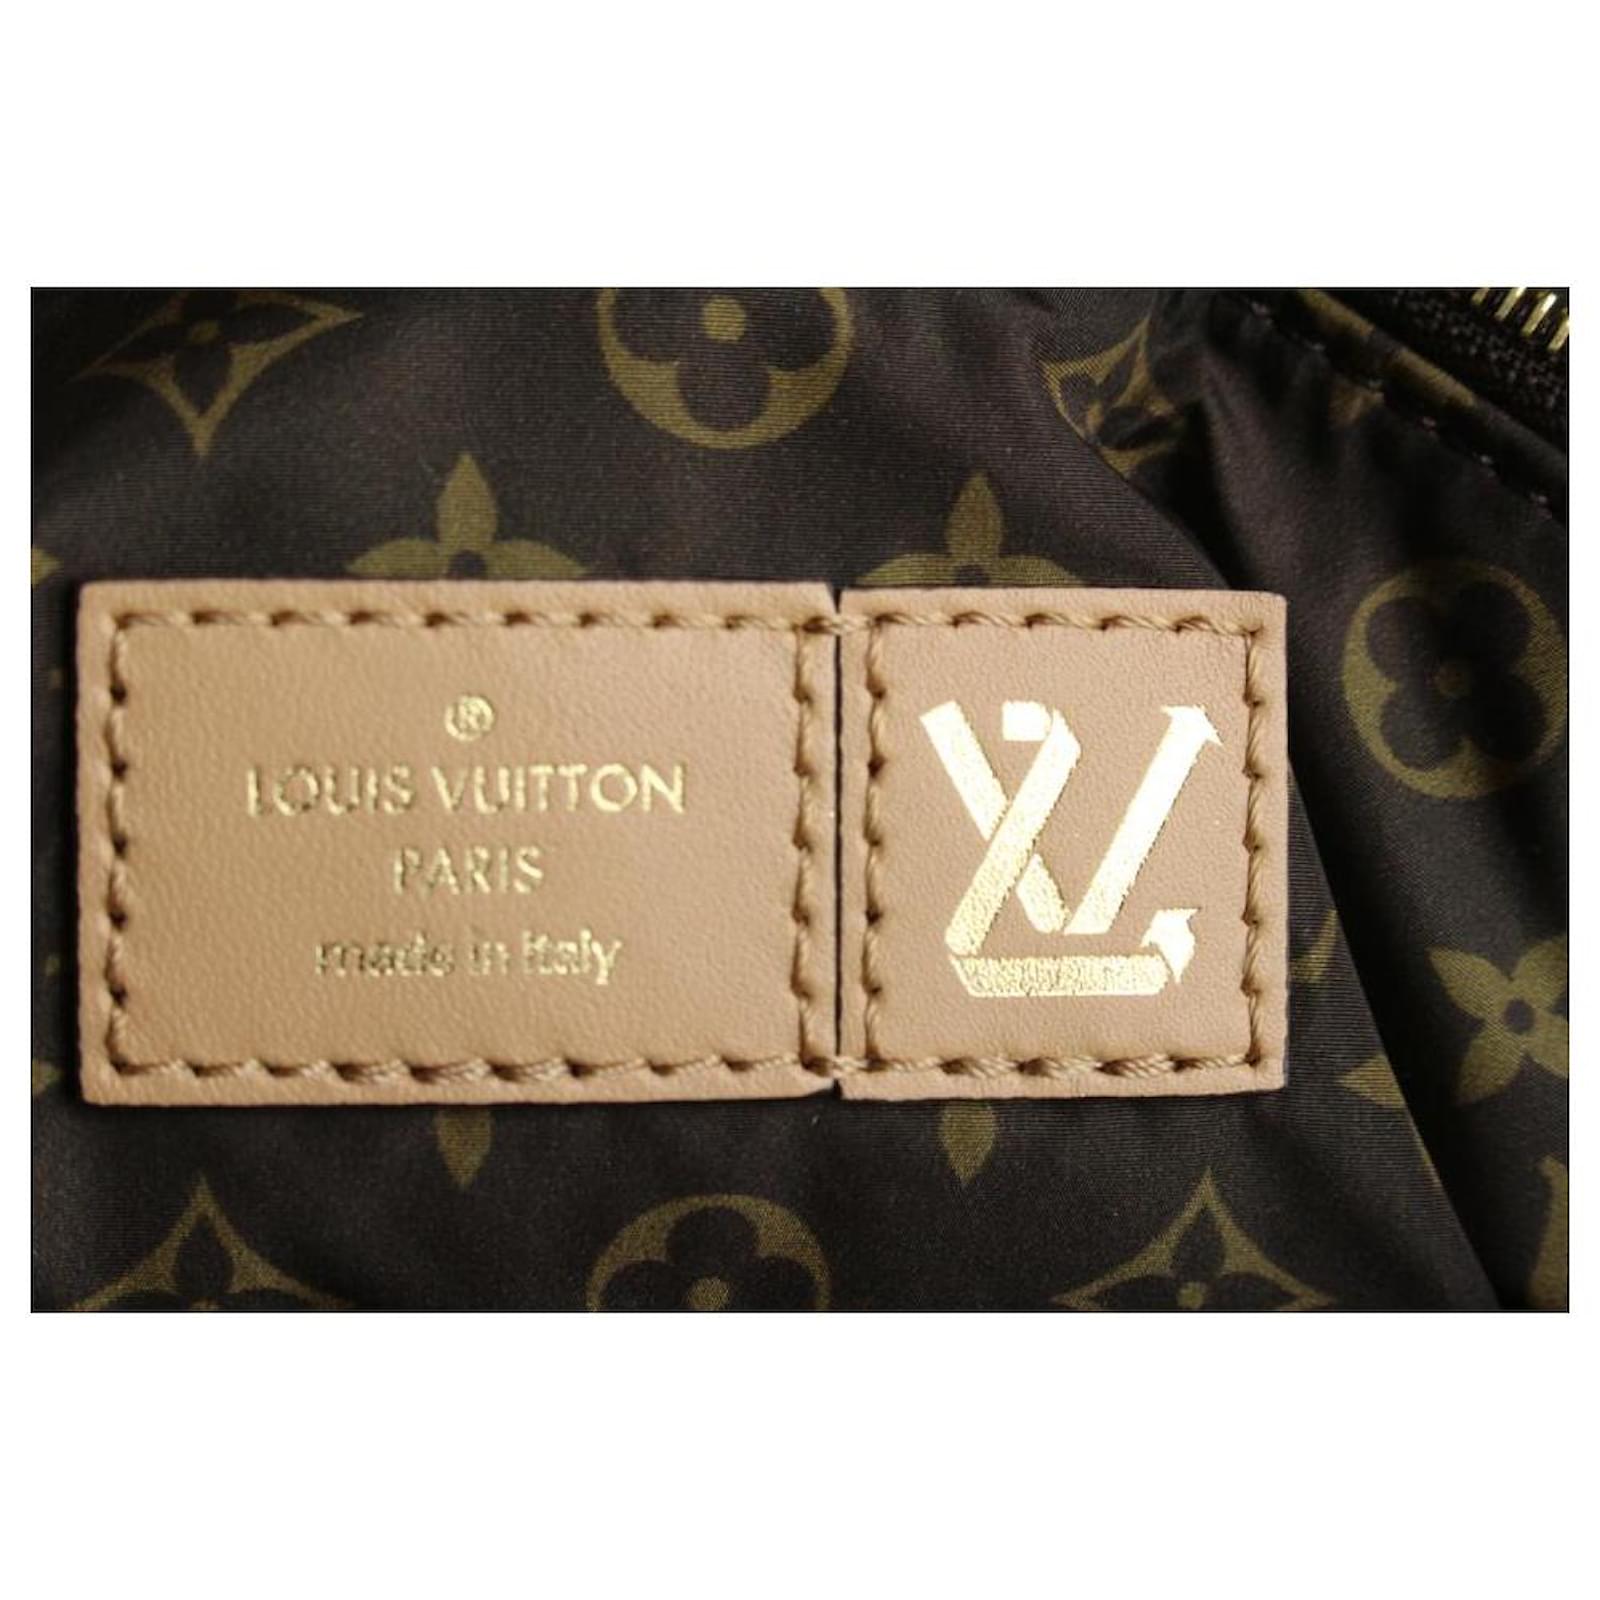 Louis Vuitton On the Go Beige Puffer Bag, New in Dustbag - Julia